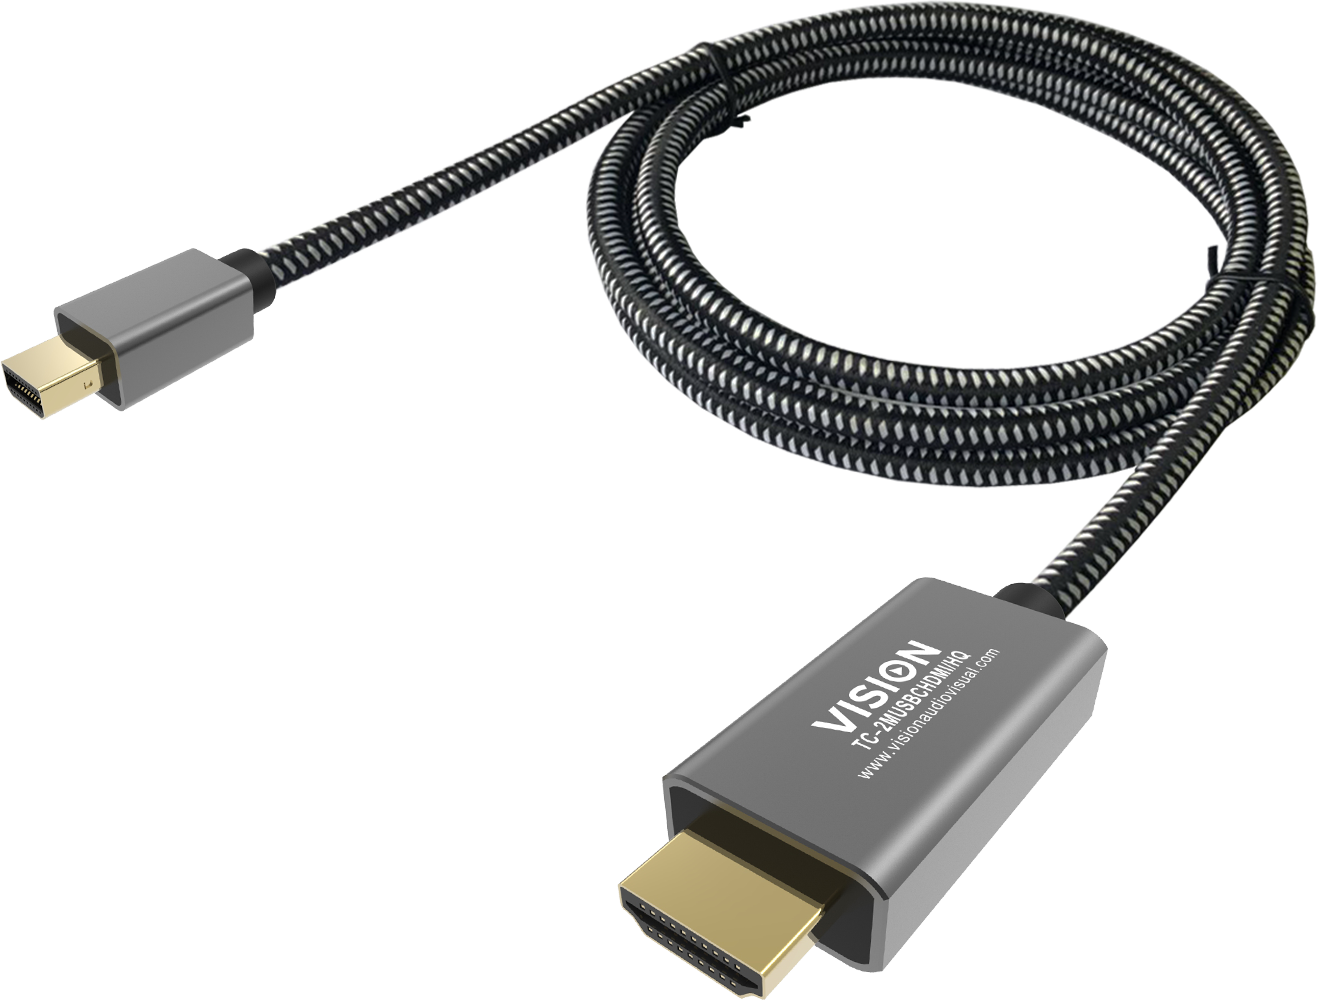 An image showing Braided Mini-DisplayPort Cable